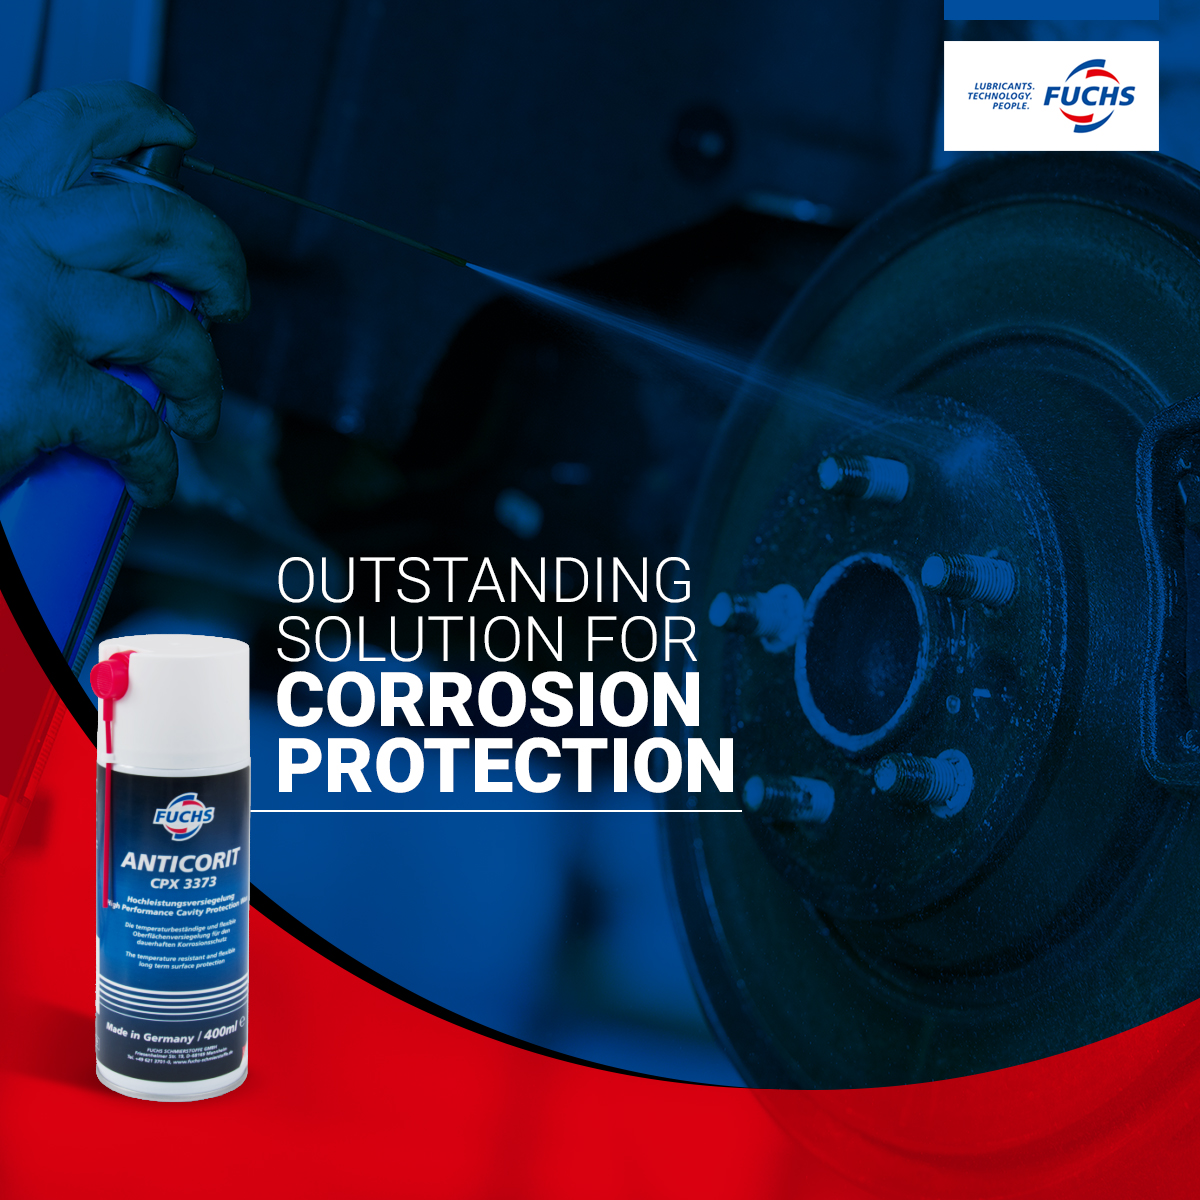 The ANTICORIT products from FUCHS are corrosion preventives that can be easily removed if necessary without damaging the surfaces to be protected.

#quality #corrosion #corrosionprotection #fuchs #spray #surfacesolutions #protection #metals #innovation #technology #machinery